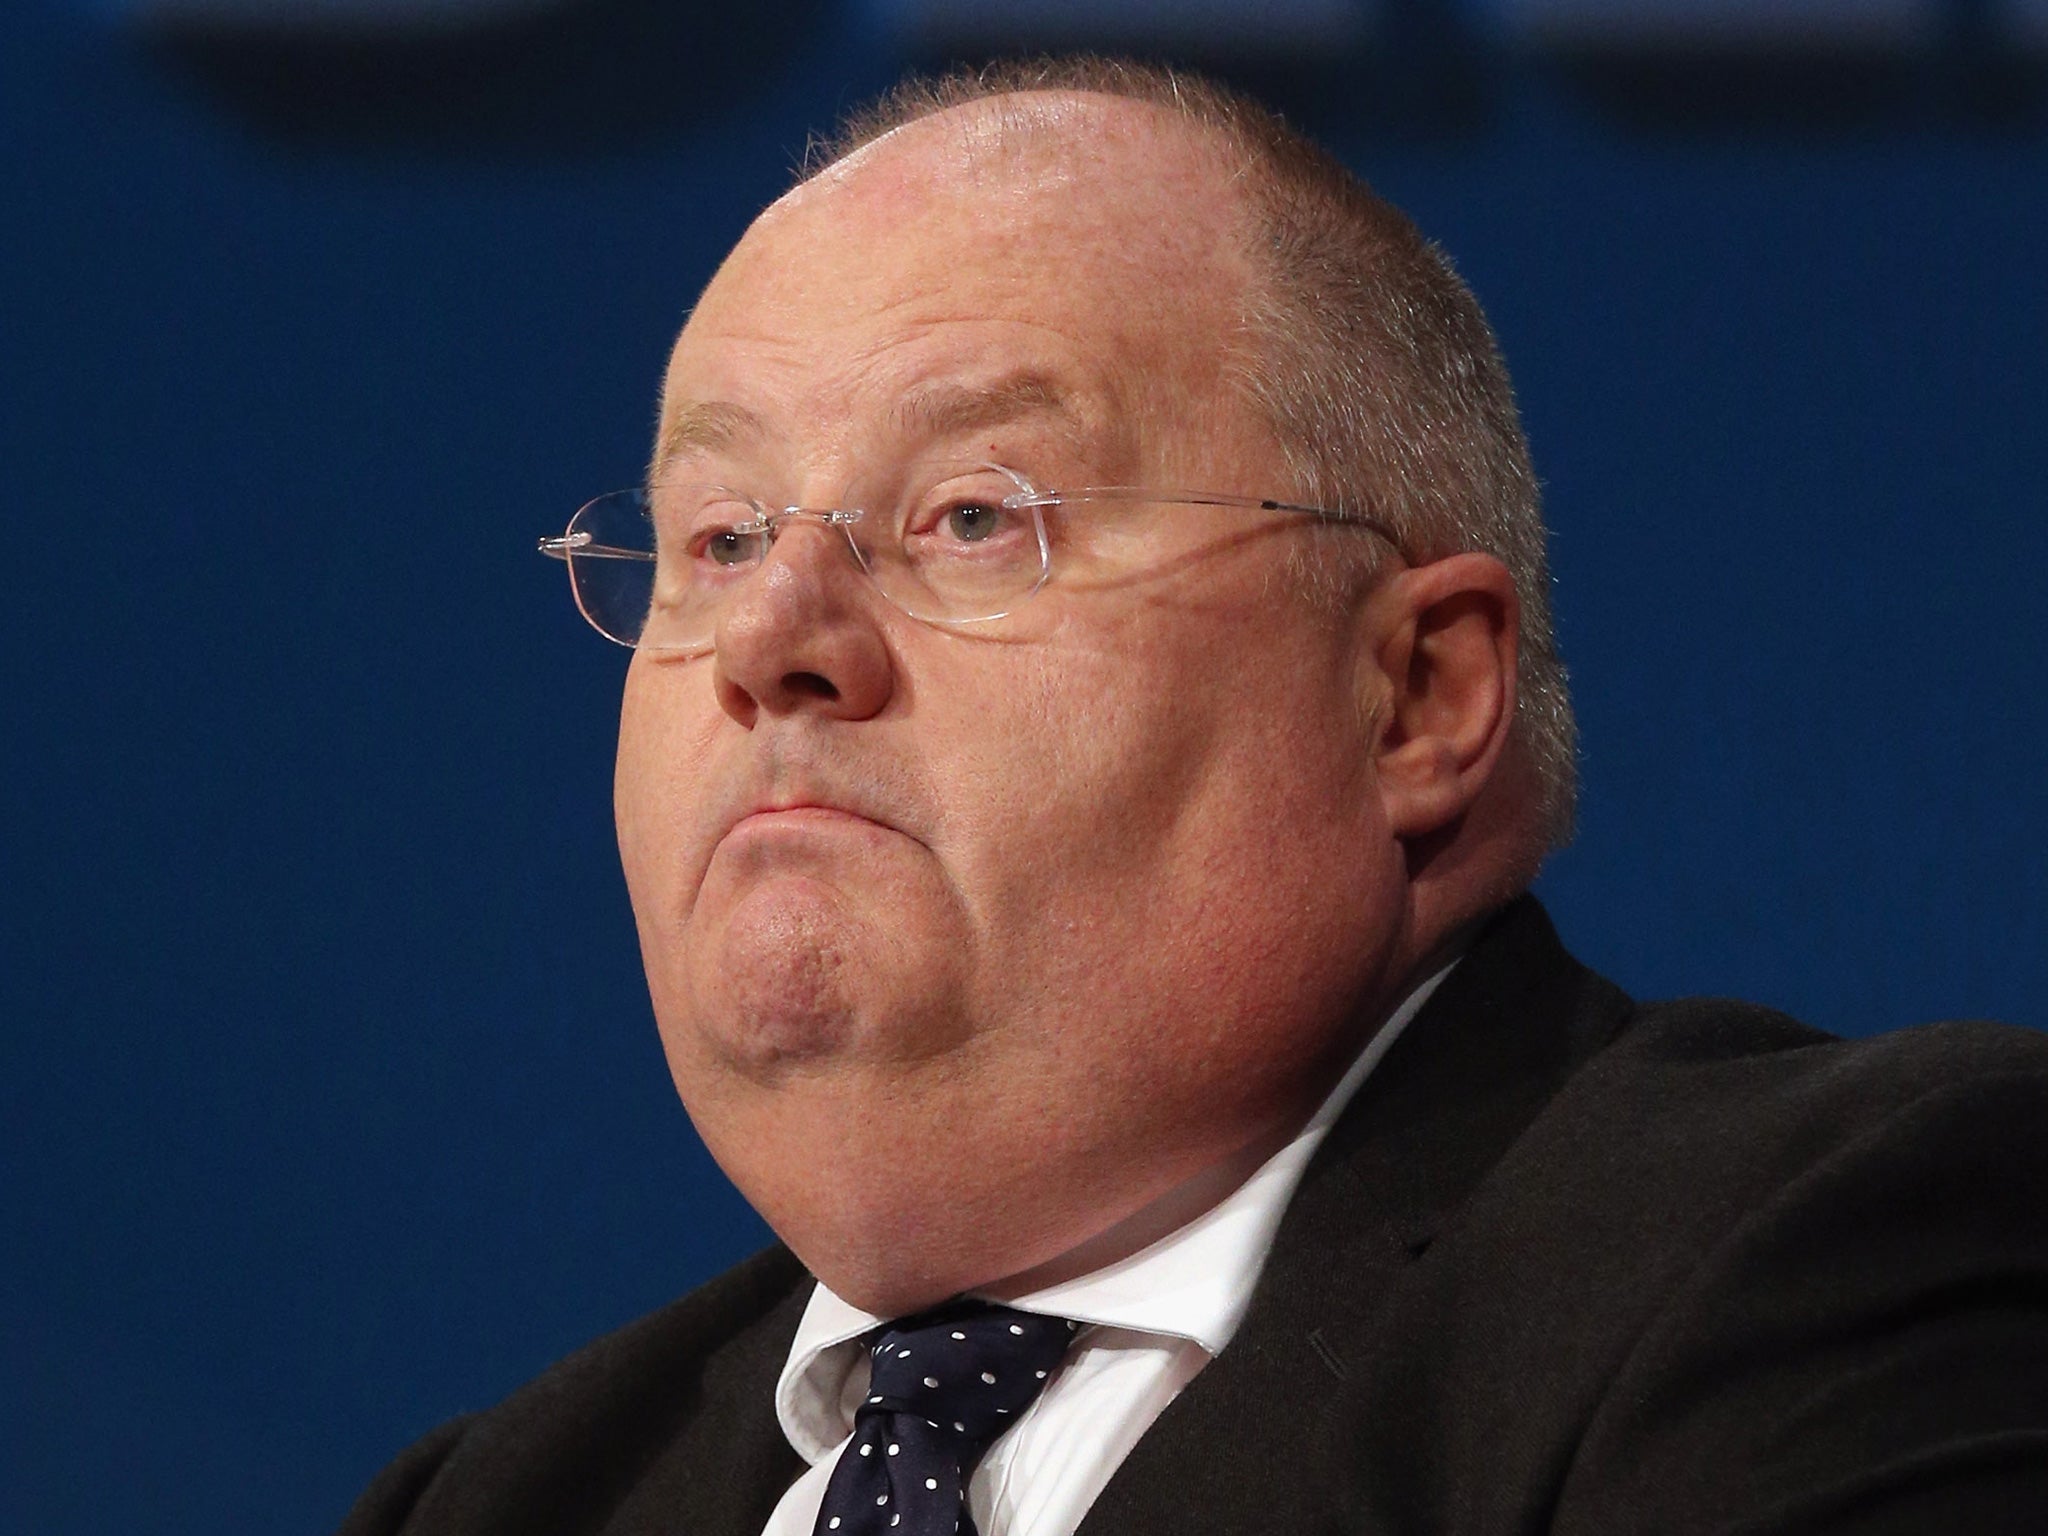 Eric Pickles: The Communities Secretary has imposed further budget cuts of about 1.7 per cent on local councils